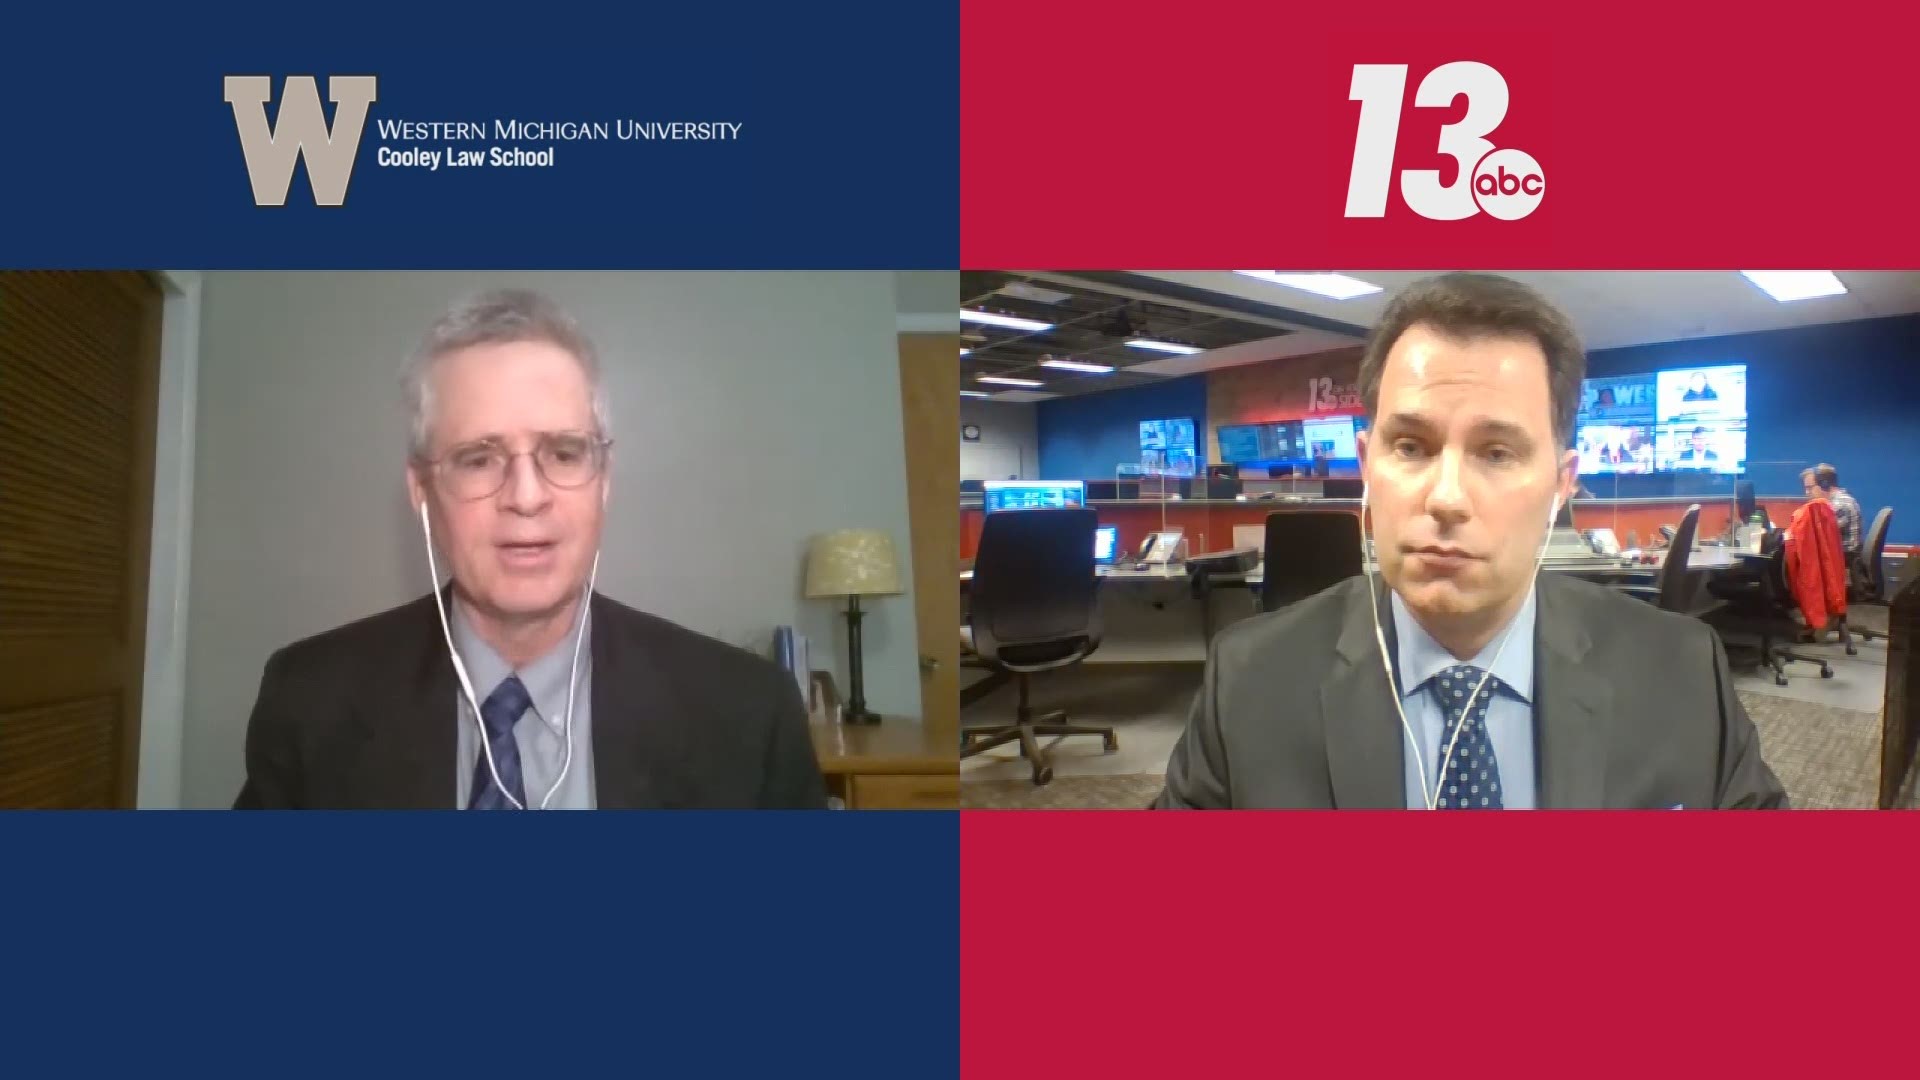 We speak with a constitutional law expert about pending lawsuits in the presidential election.